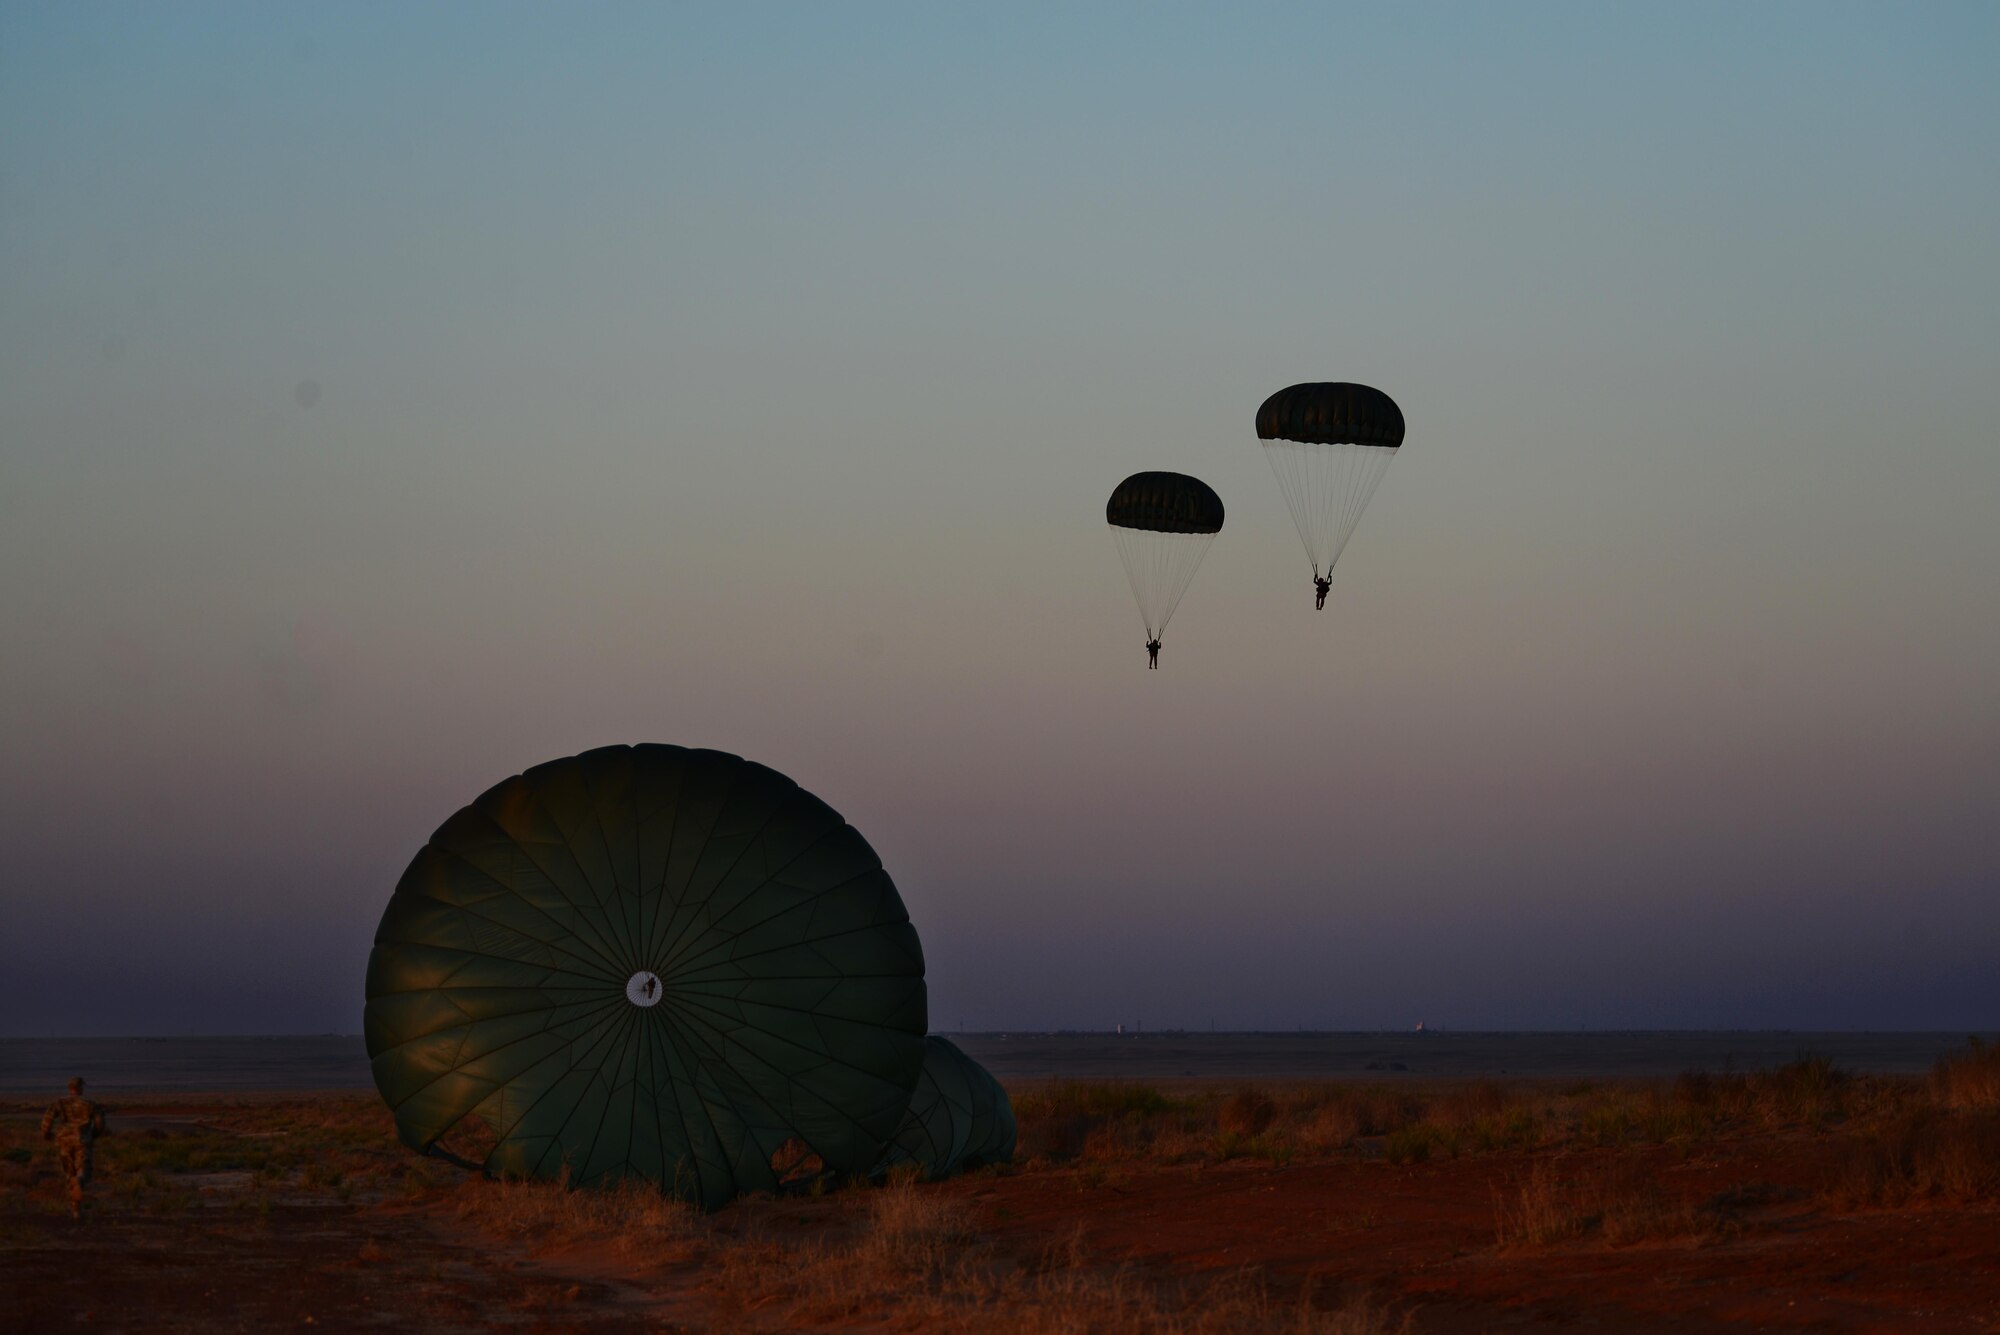 Soldiers from the 193rd Infantry Brigade and Airmen from the 26th Special Tactics Squadron land after a parachute jump as a part of exercise Emerald Warrior April 28, 2015, at Melrose Air Force Range, N.M. Emerald Warrior is the Defense Department’s only irregular warfare exercise, allowing joint and combined partners to train together and prepare for real-world contingency operations. (U.S. Air Force Photo/Airman 1st Class Shelby Kay-Fantozzi)